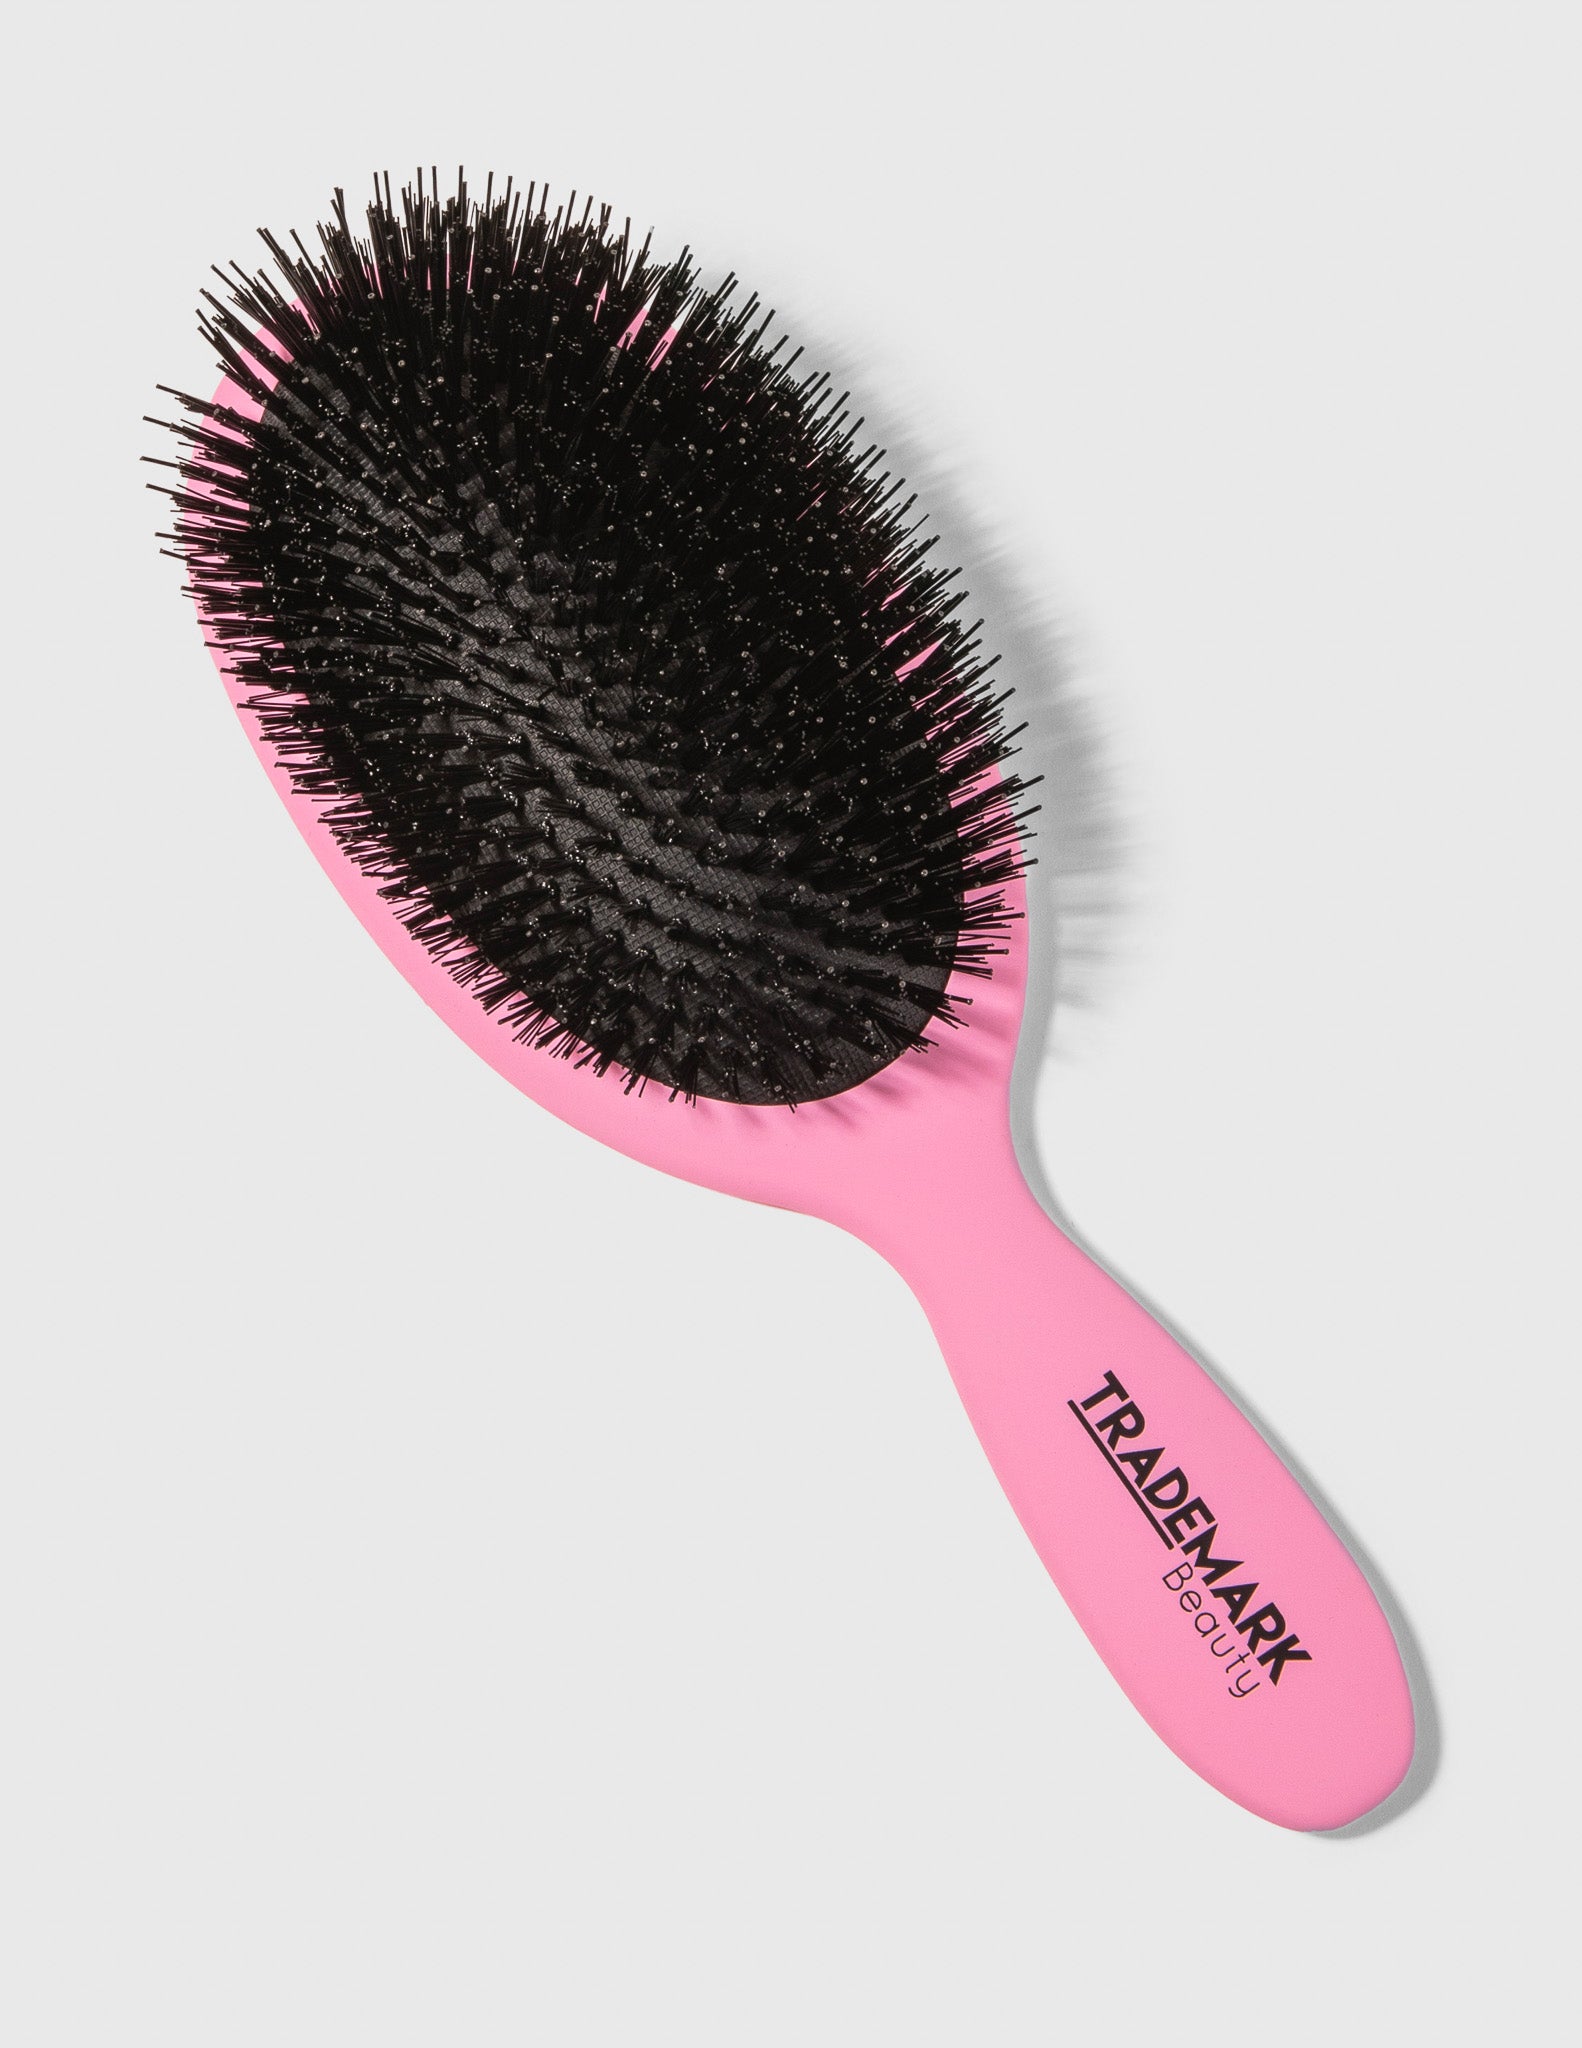 2 Pieces Hair Brush Cleaning Tool Comb Cleaner Brush Mini Hair Brush  Remover for Removing Hair Dust Home and Salon Use (Plastic Handle Rake,  Pink and